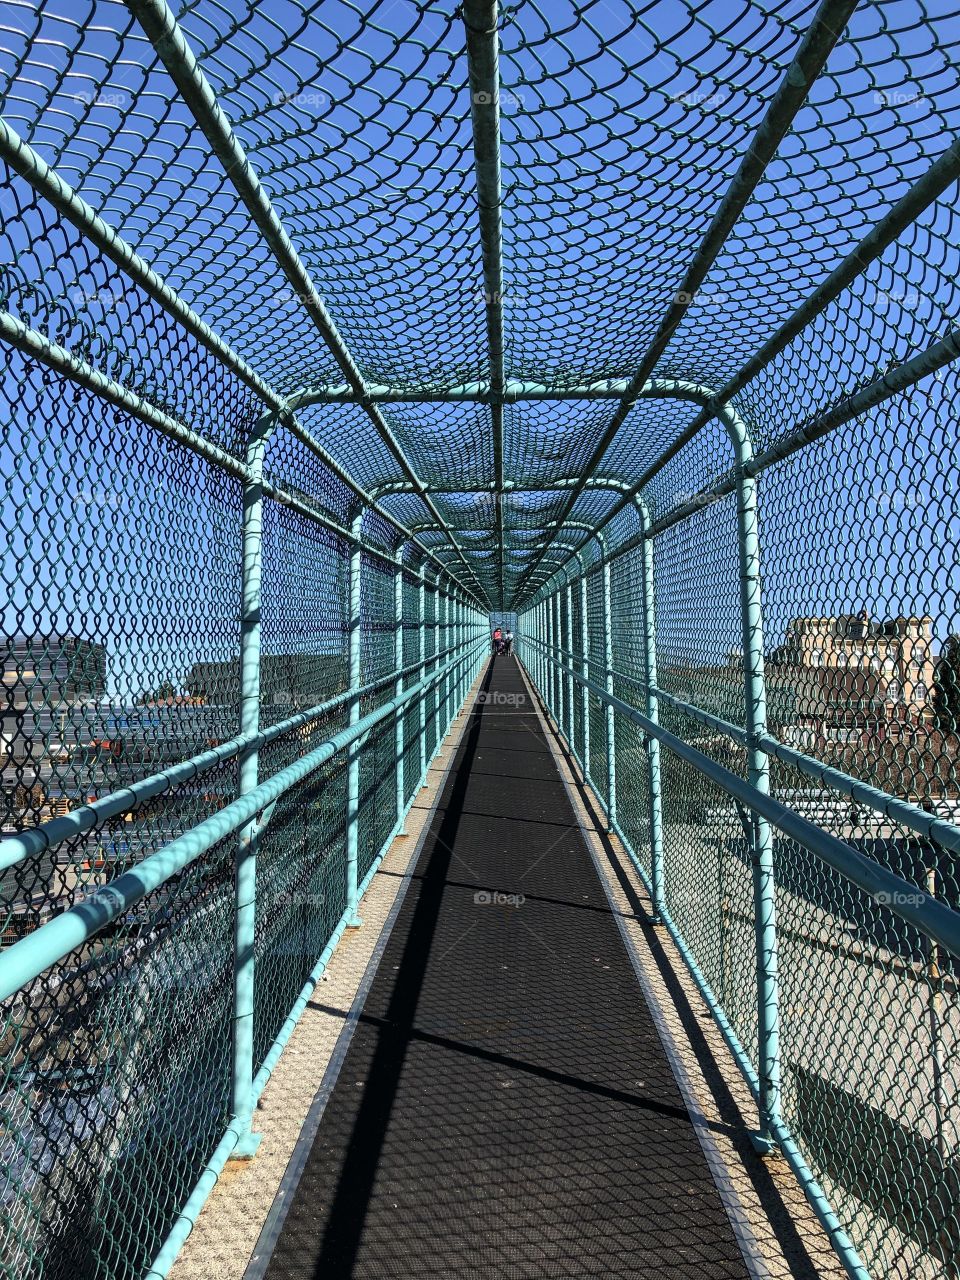 A caged overpass recedes into infinity. 